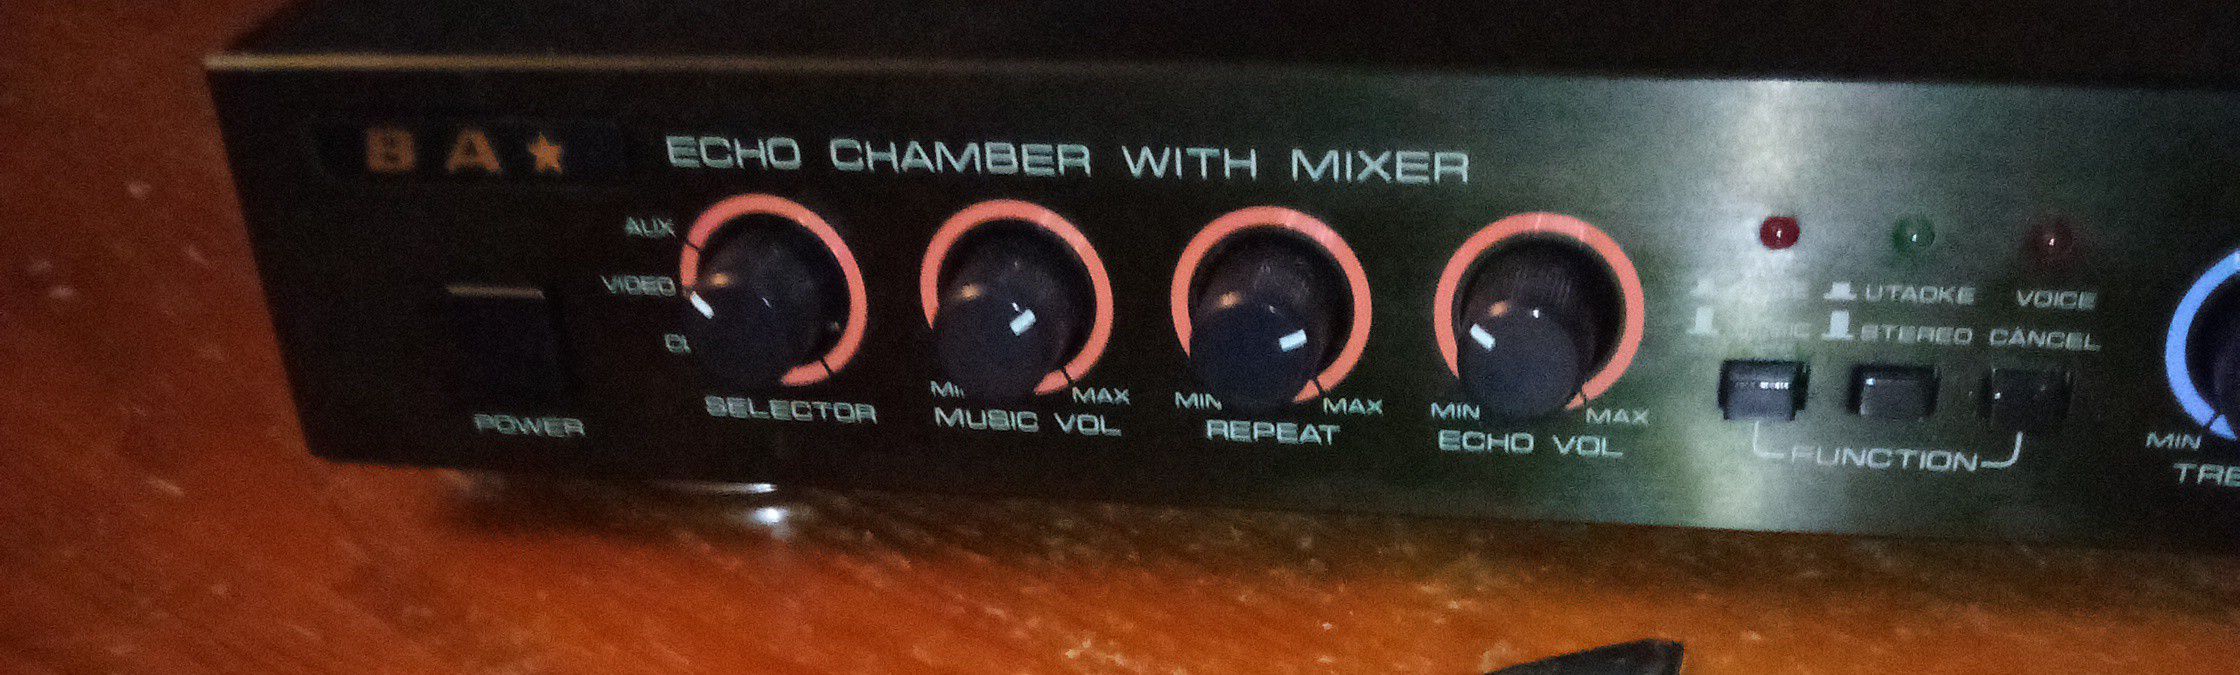 ES-2200 Echo Chamber With Mixer 